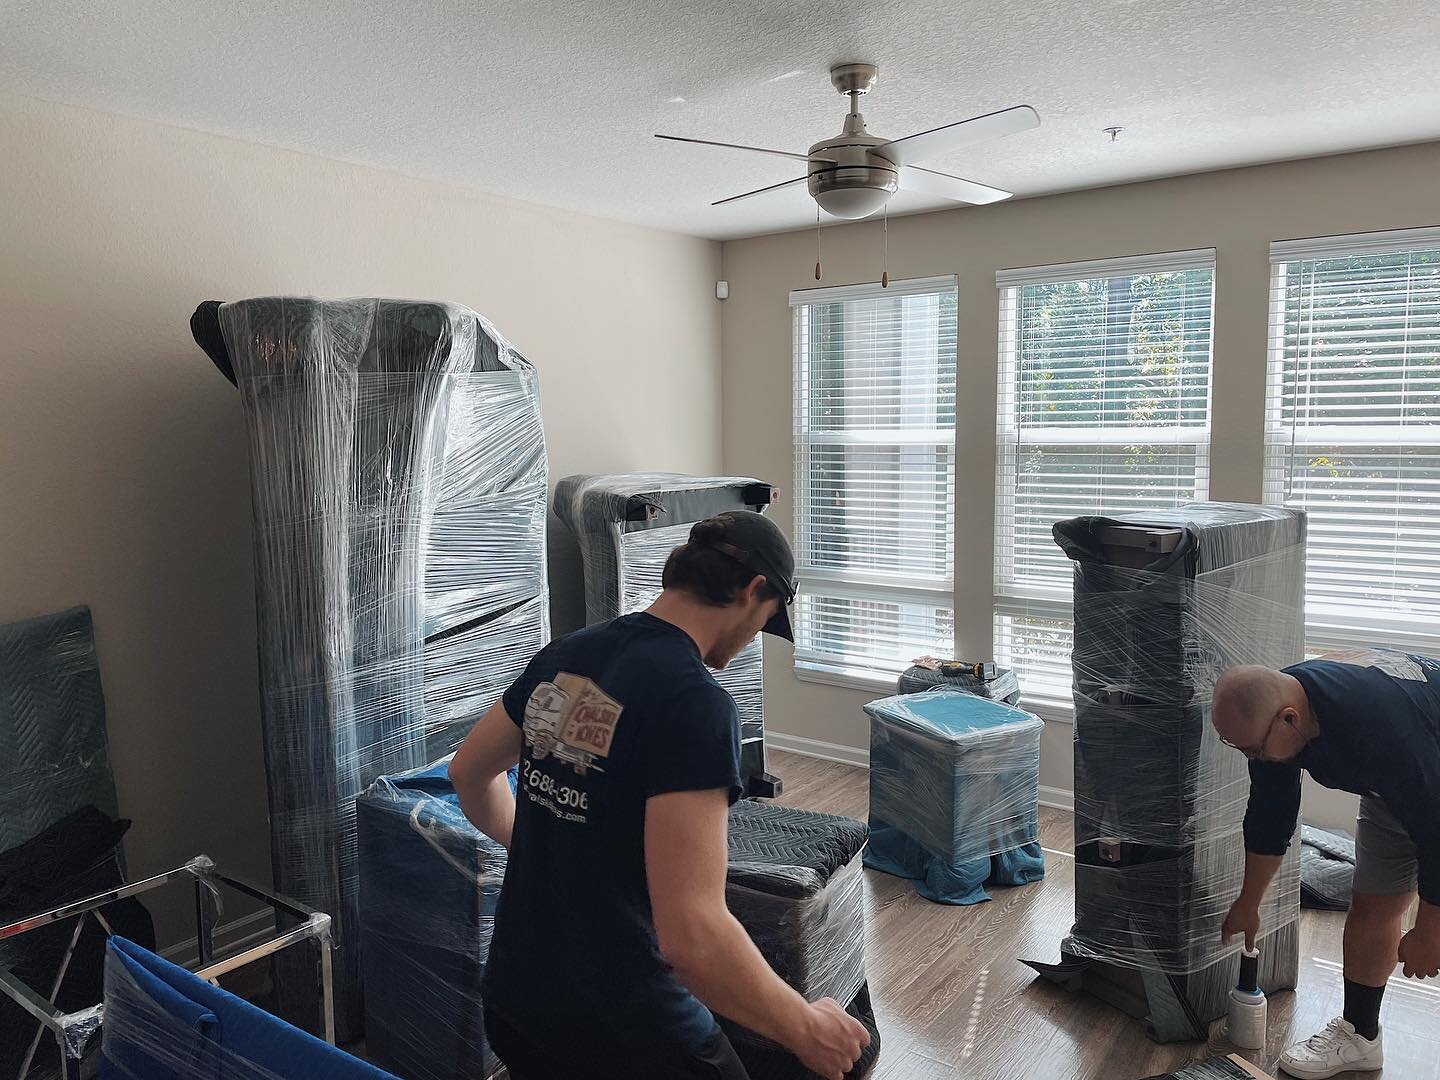 Ready for the work week 💪

#tampaflorida #clearwaterflorida #moving #thatsotampa #movingprep